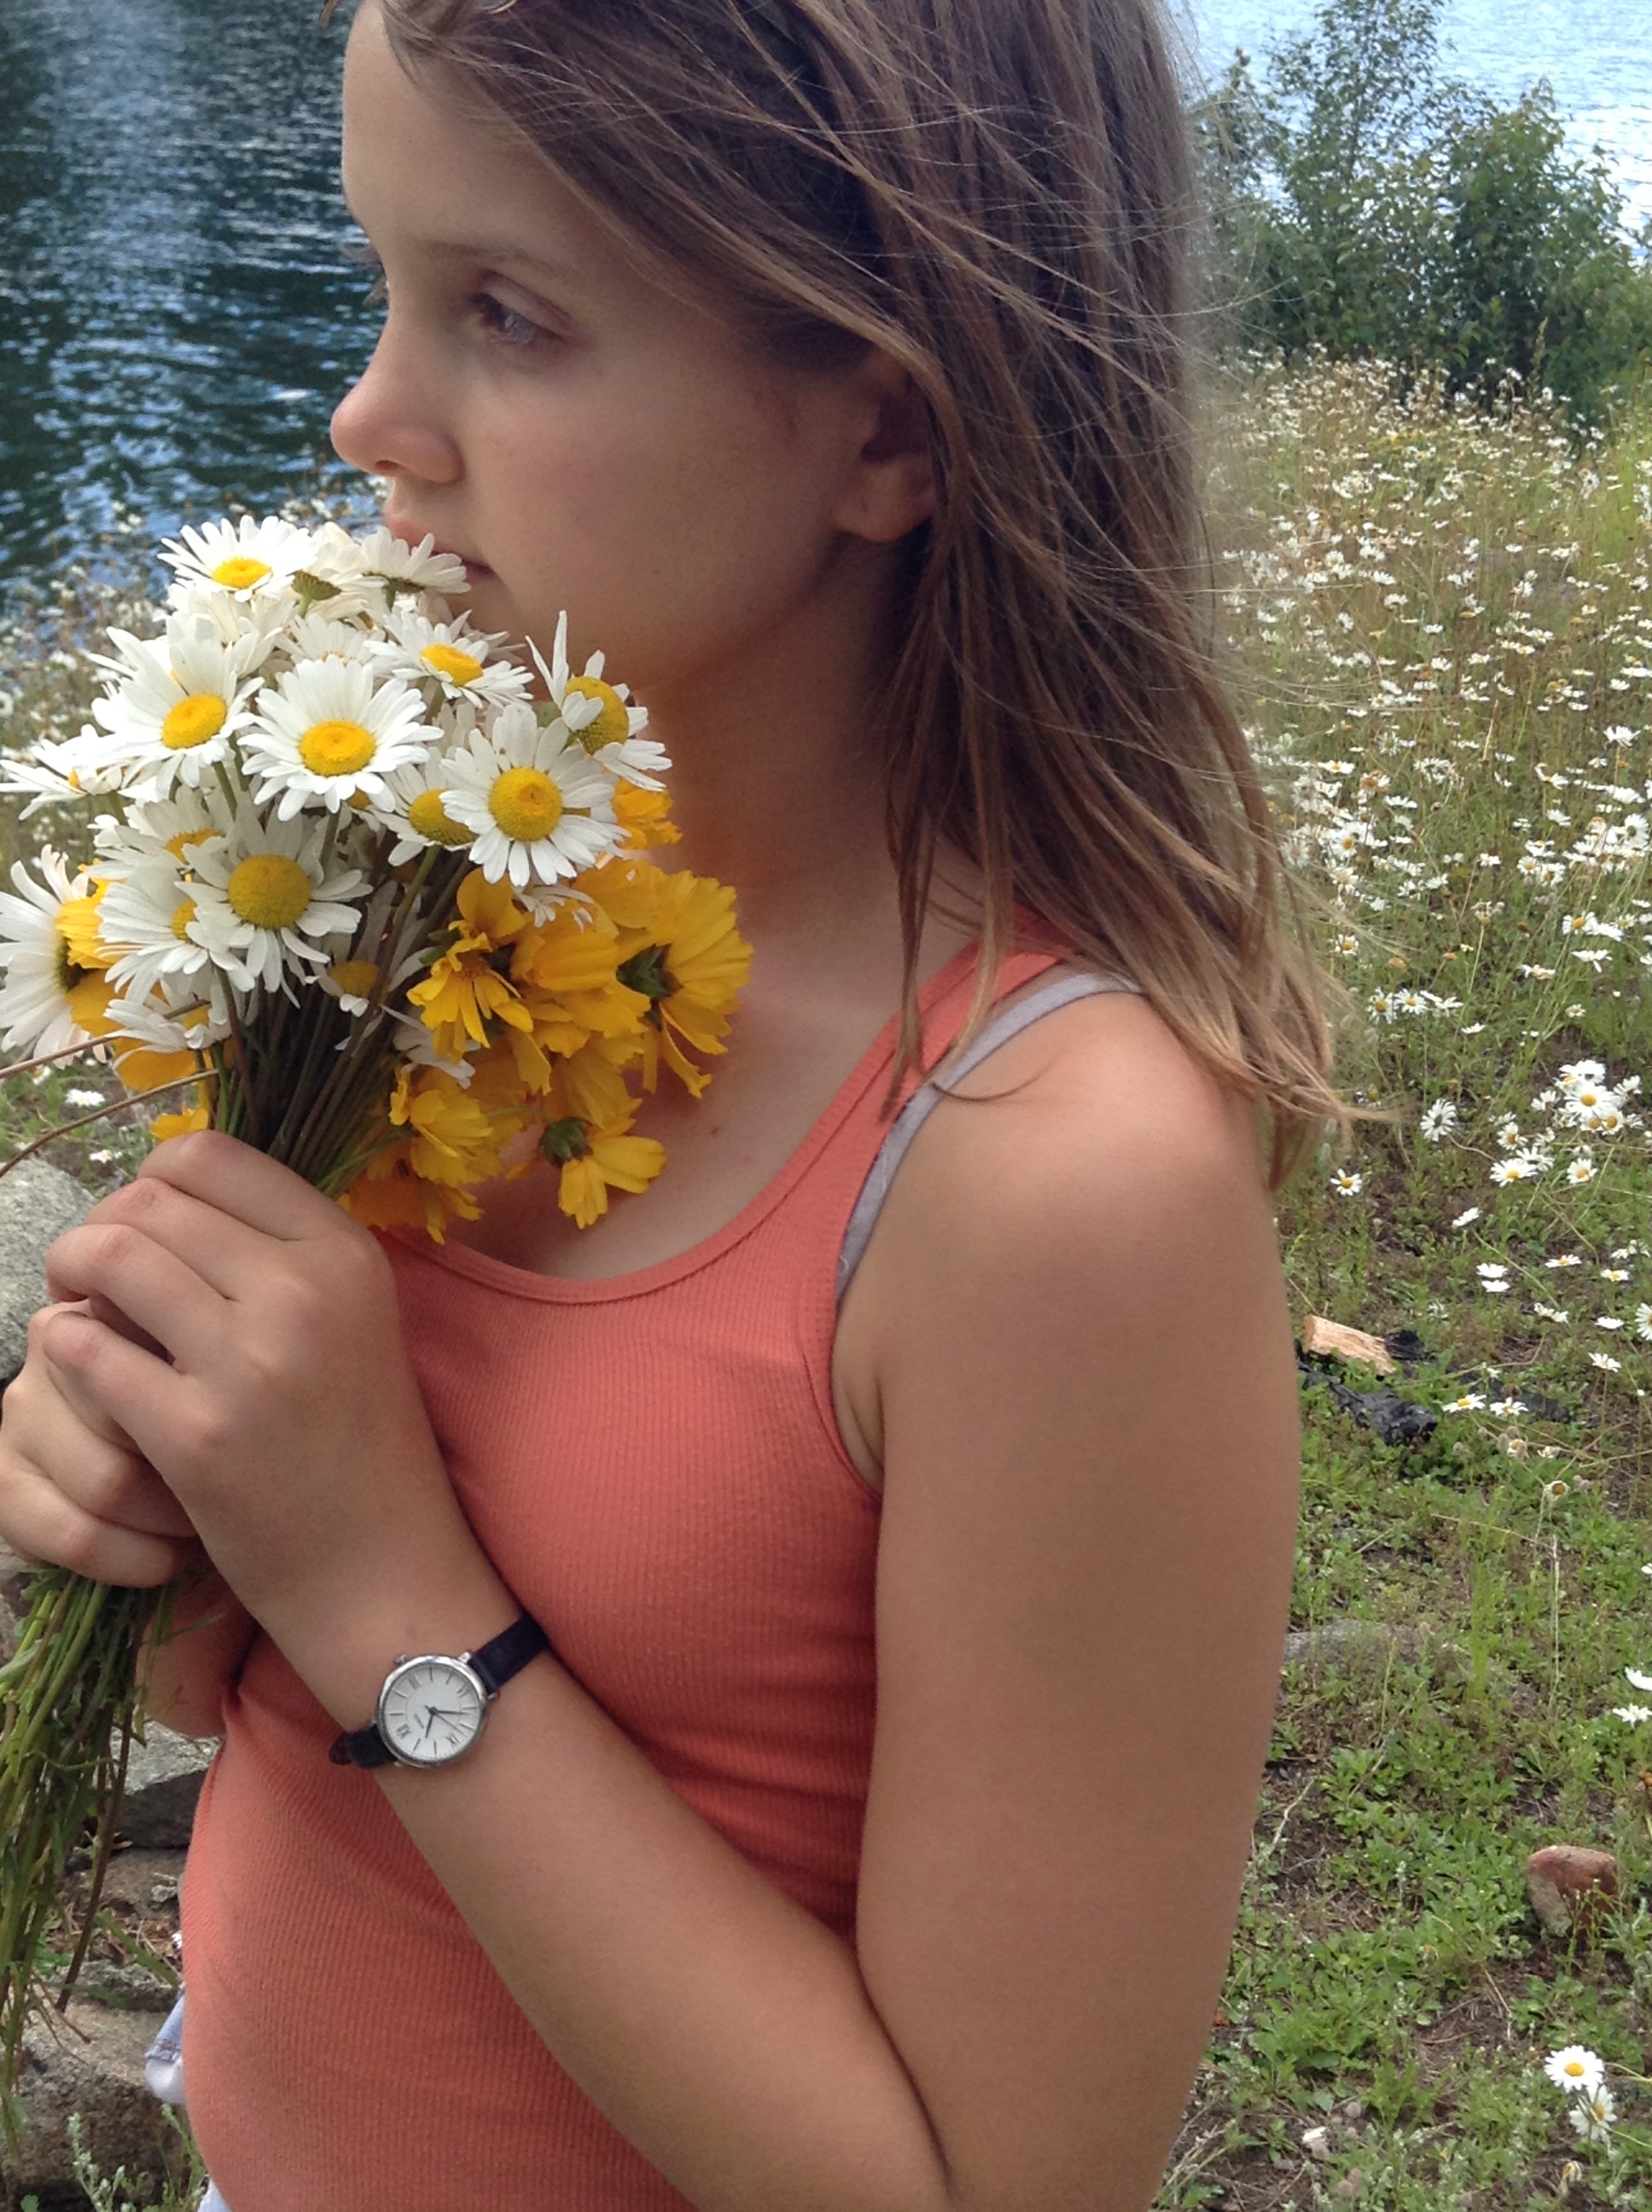 Madelyn stopping to smell the daisies: so should I homeschool in summer? 
